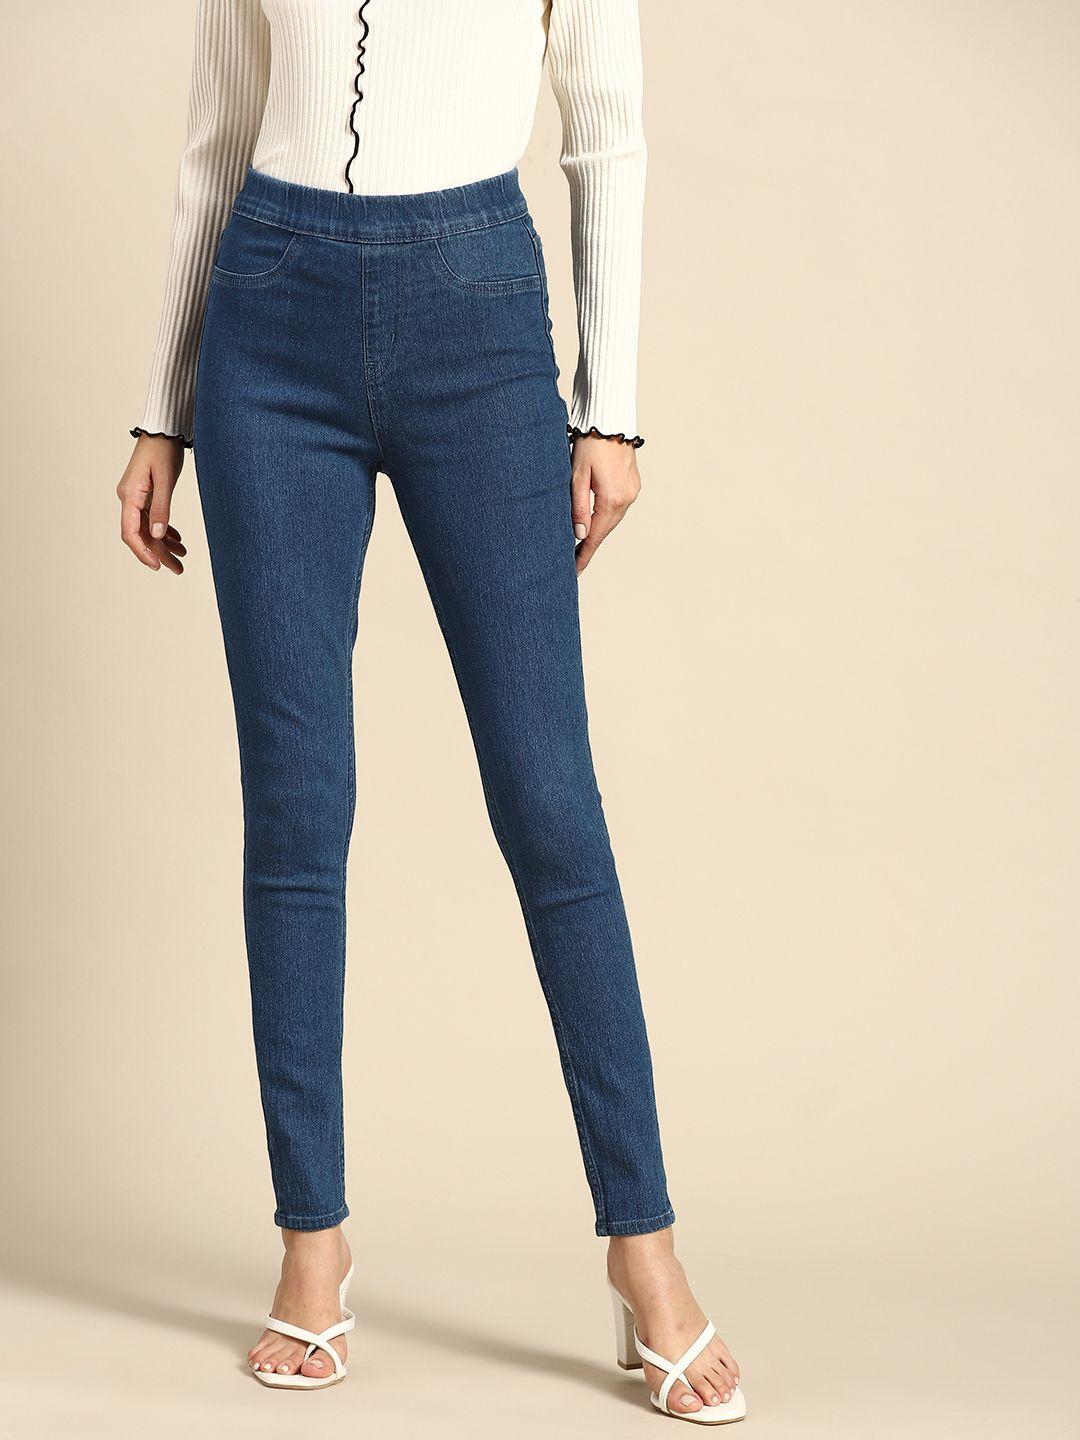 all about you blue solid super skinny fit high rise denim jeggings